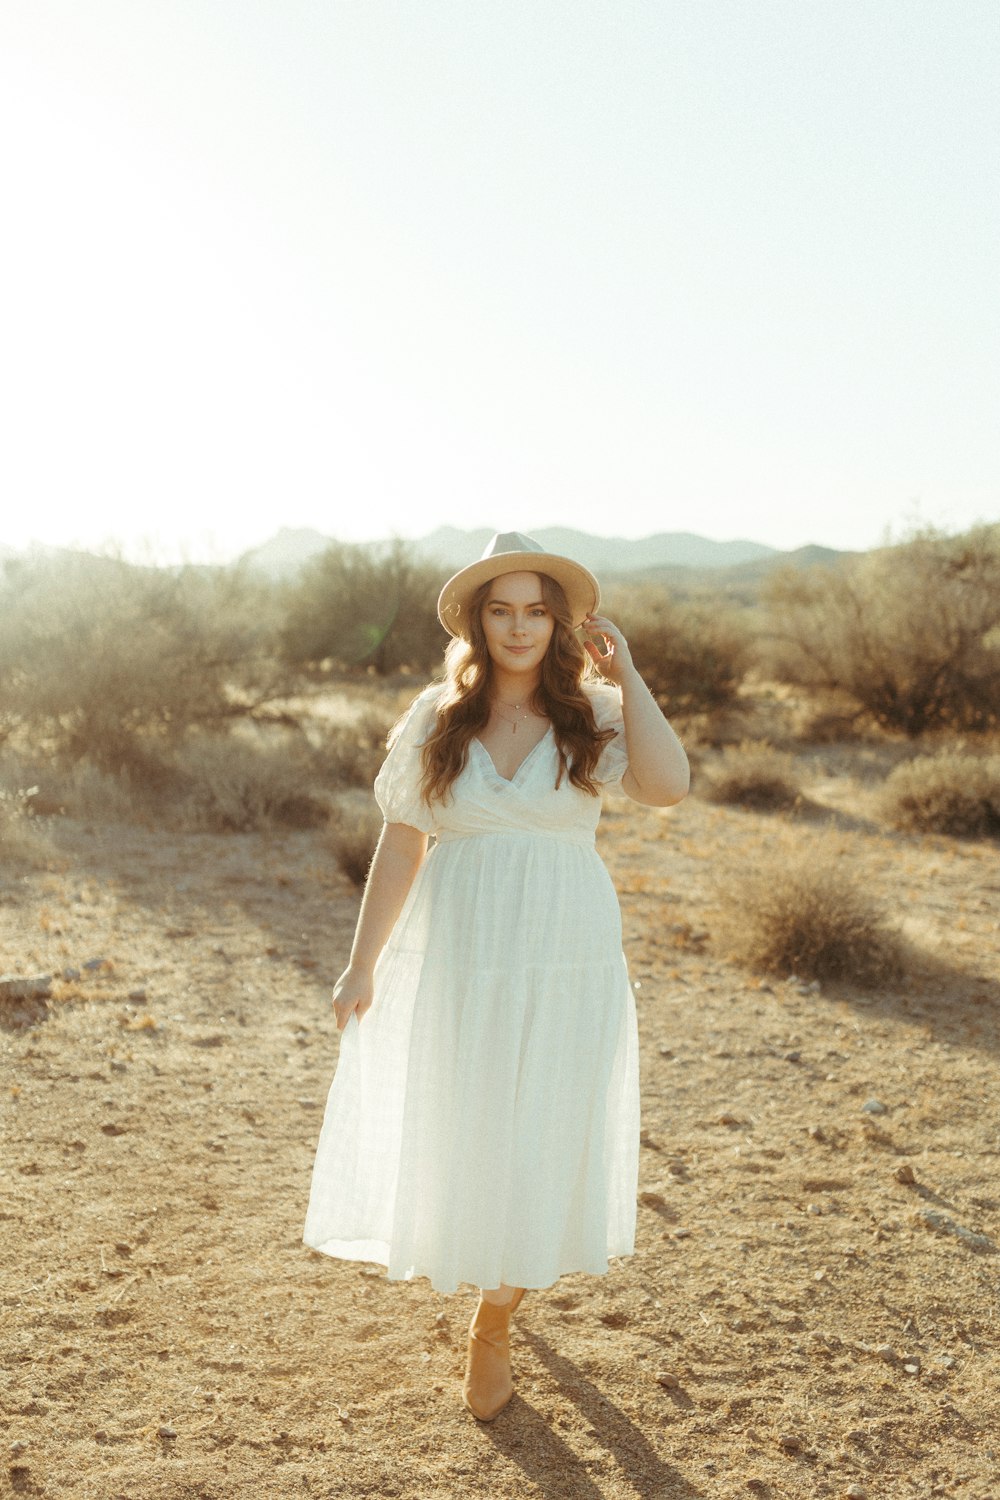 woman in white dress standing on brown field during daytime